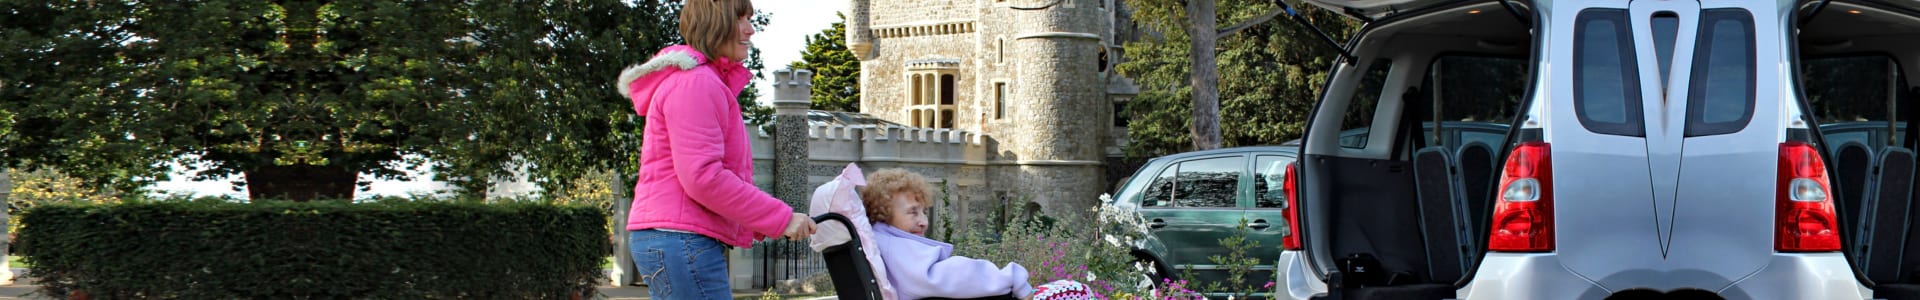 Photo of a daughter caring for her disabled mother by assisting her into the back of a wheelchair access vehicle after spending a lovely day out visiting a castle for cream teas